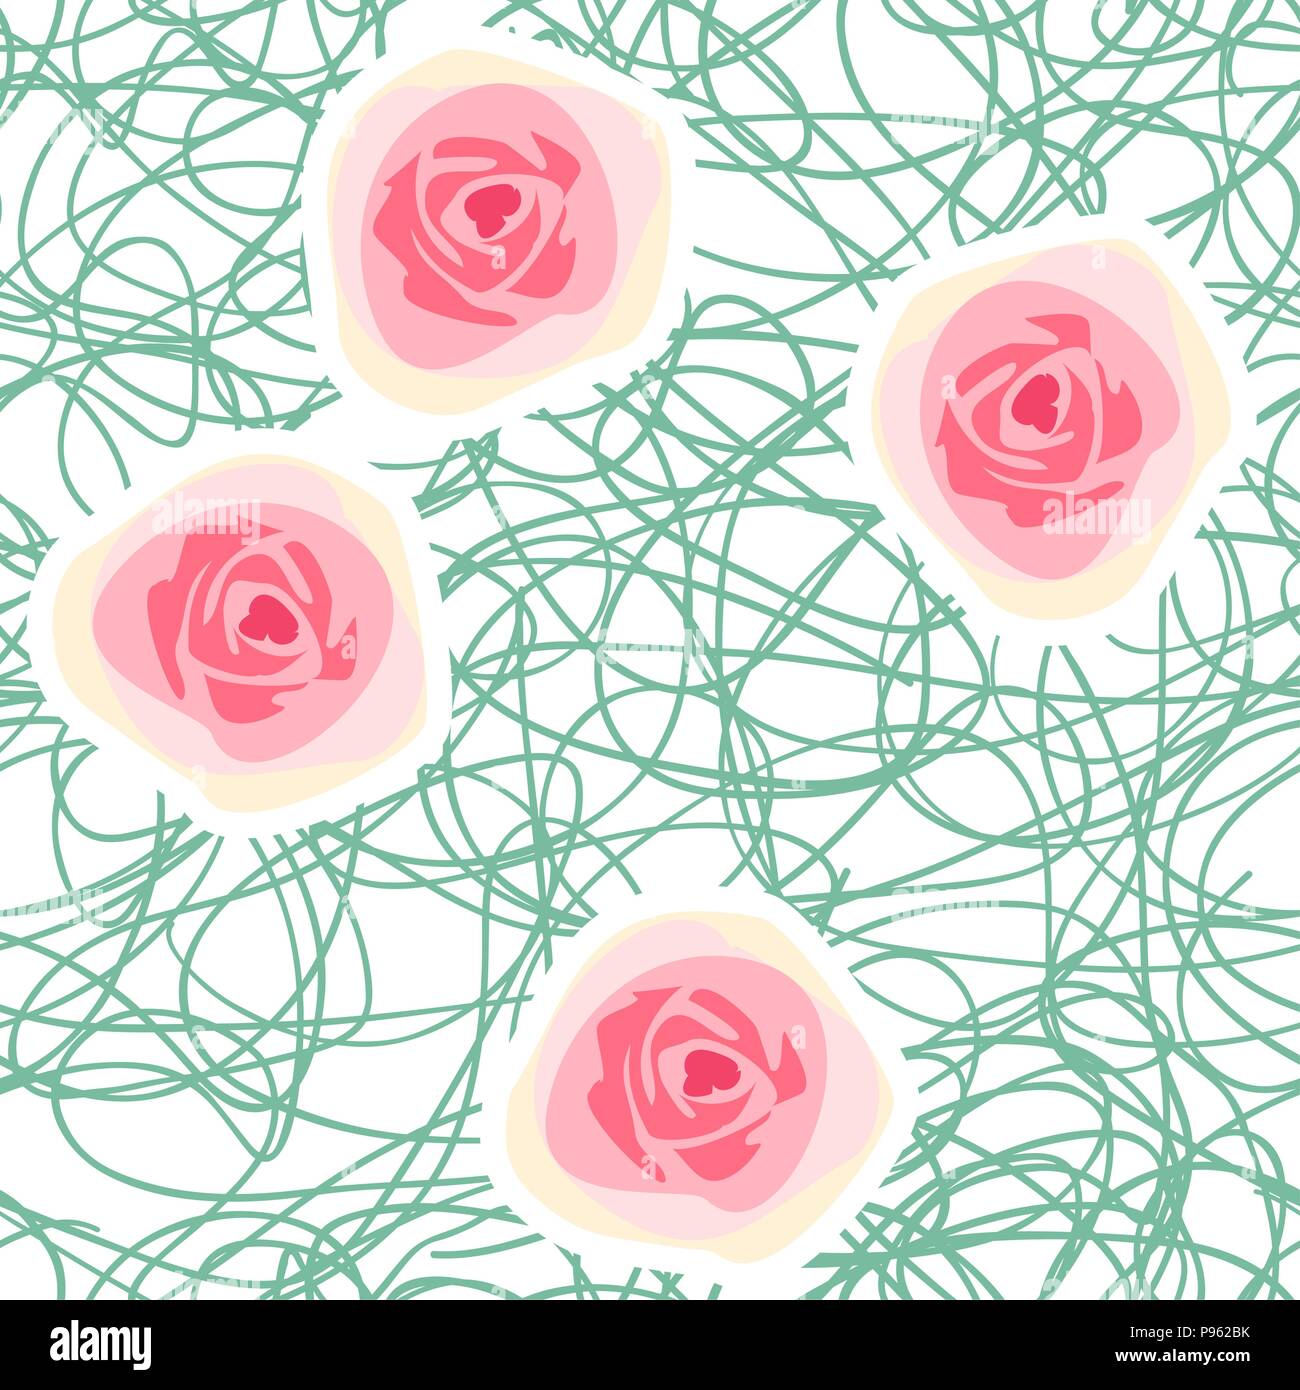 vector seamless floral background with abstract roses and chaotic squiggly lines Stock Vector